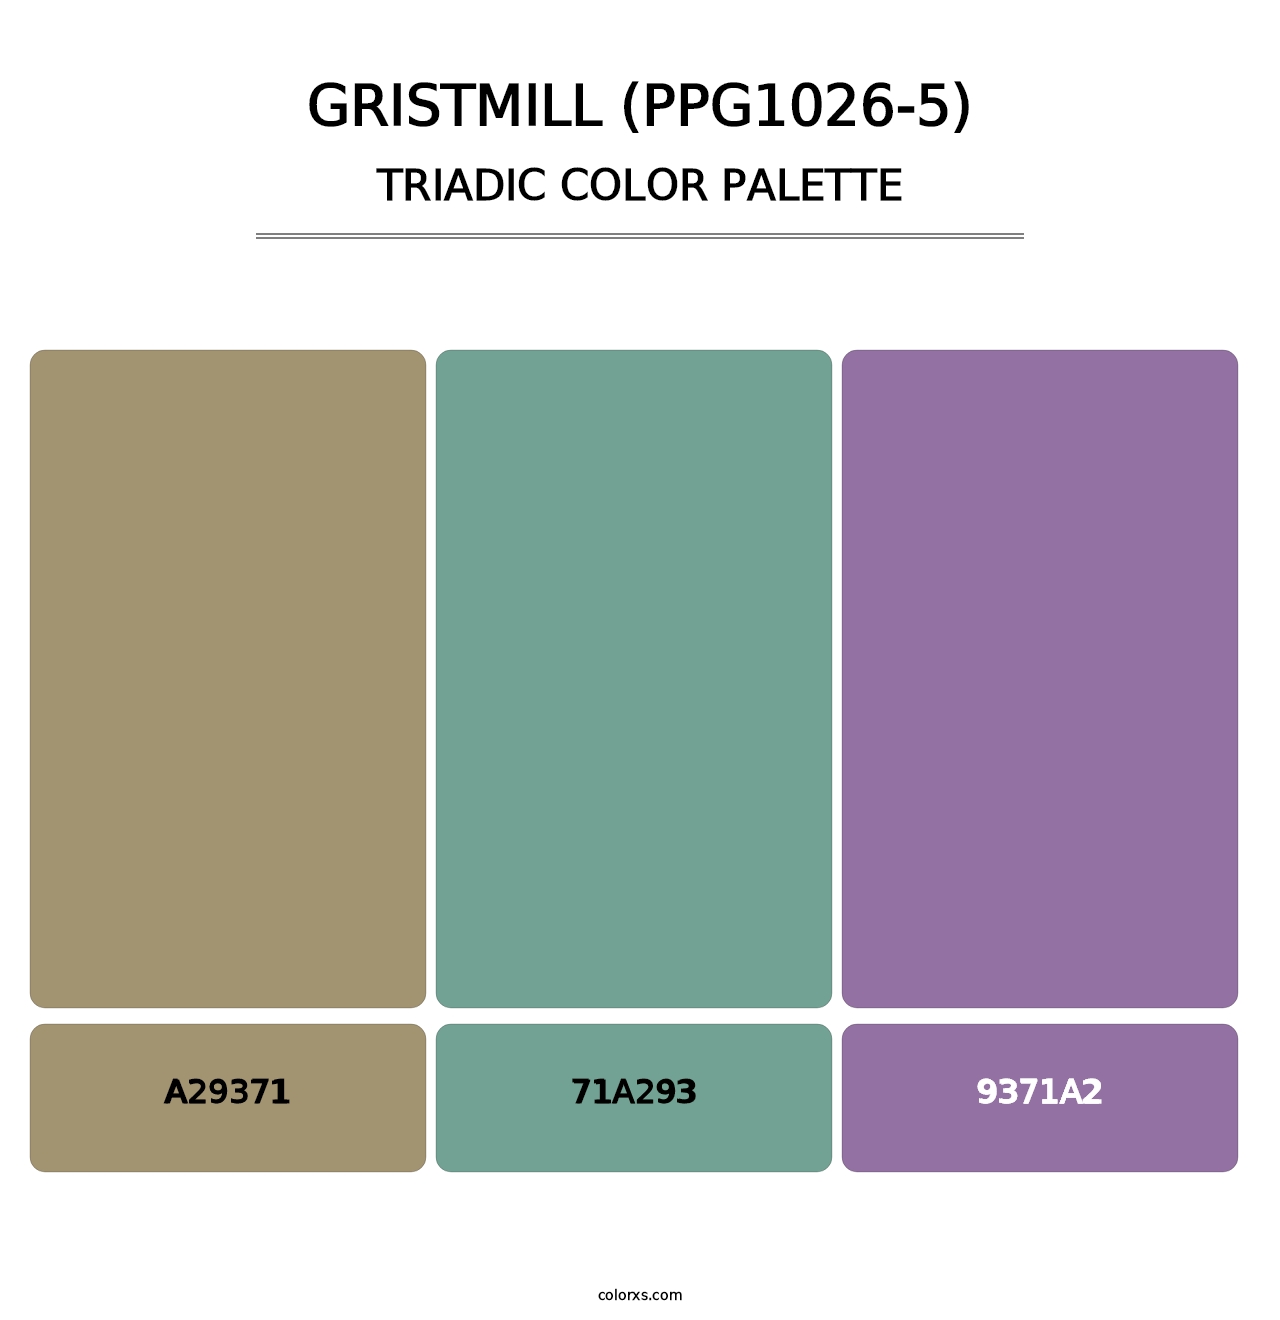 Gristmill (PPG1026-5) - Triadic Color Palette